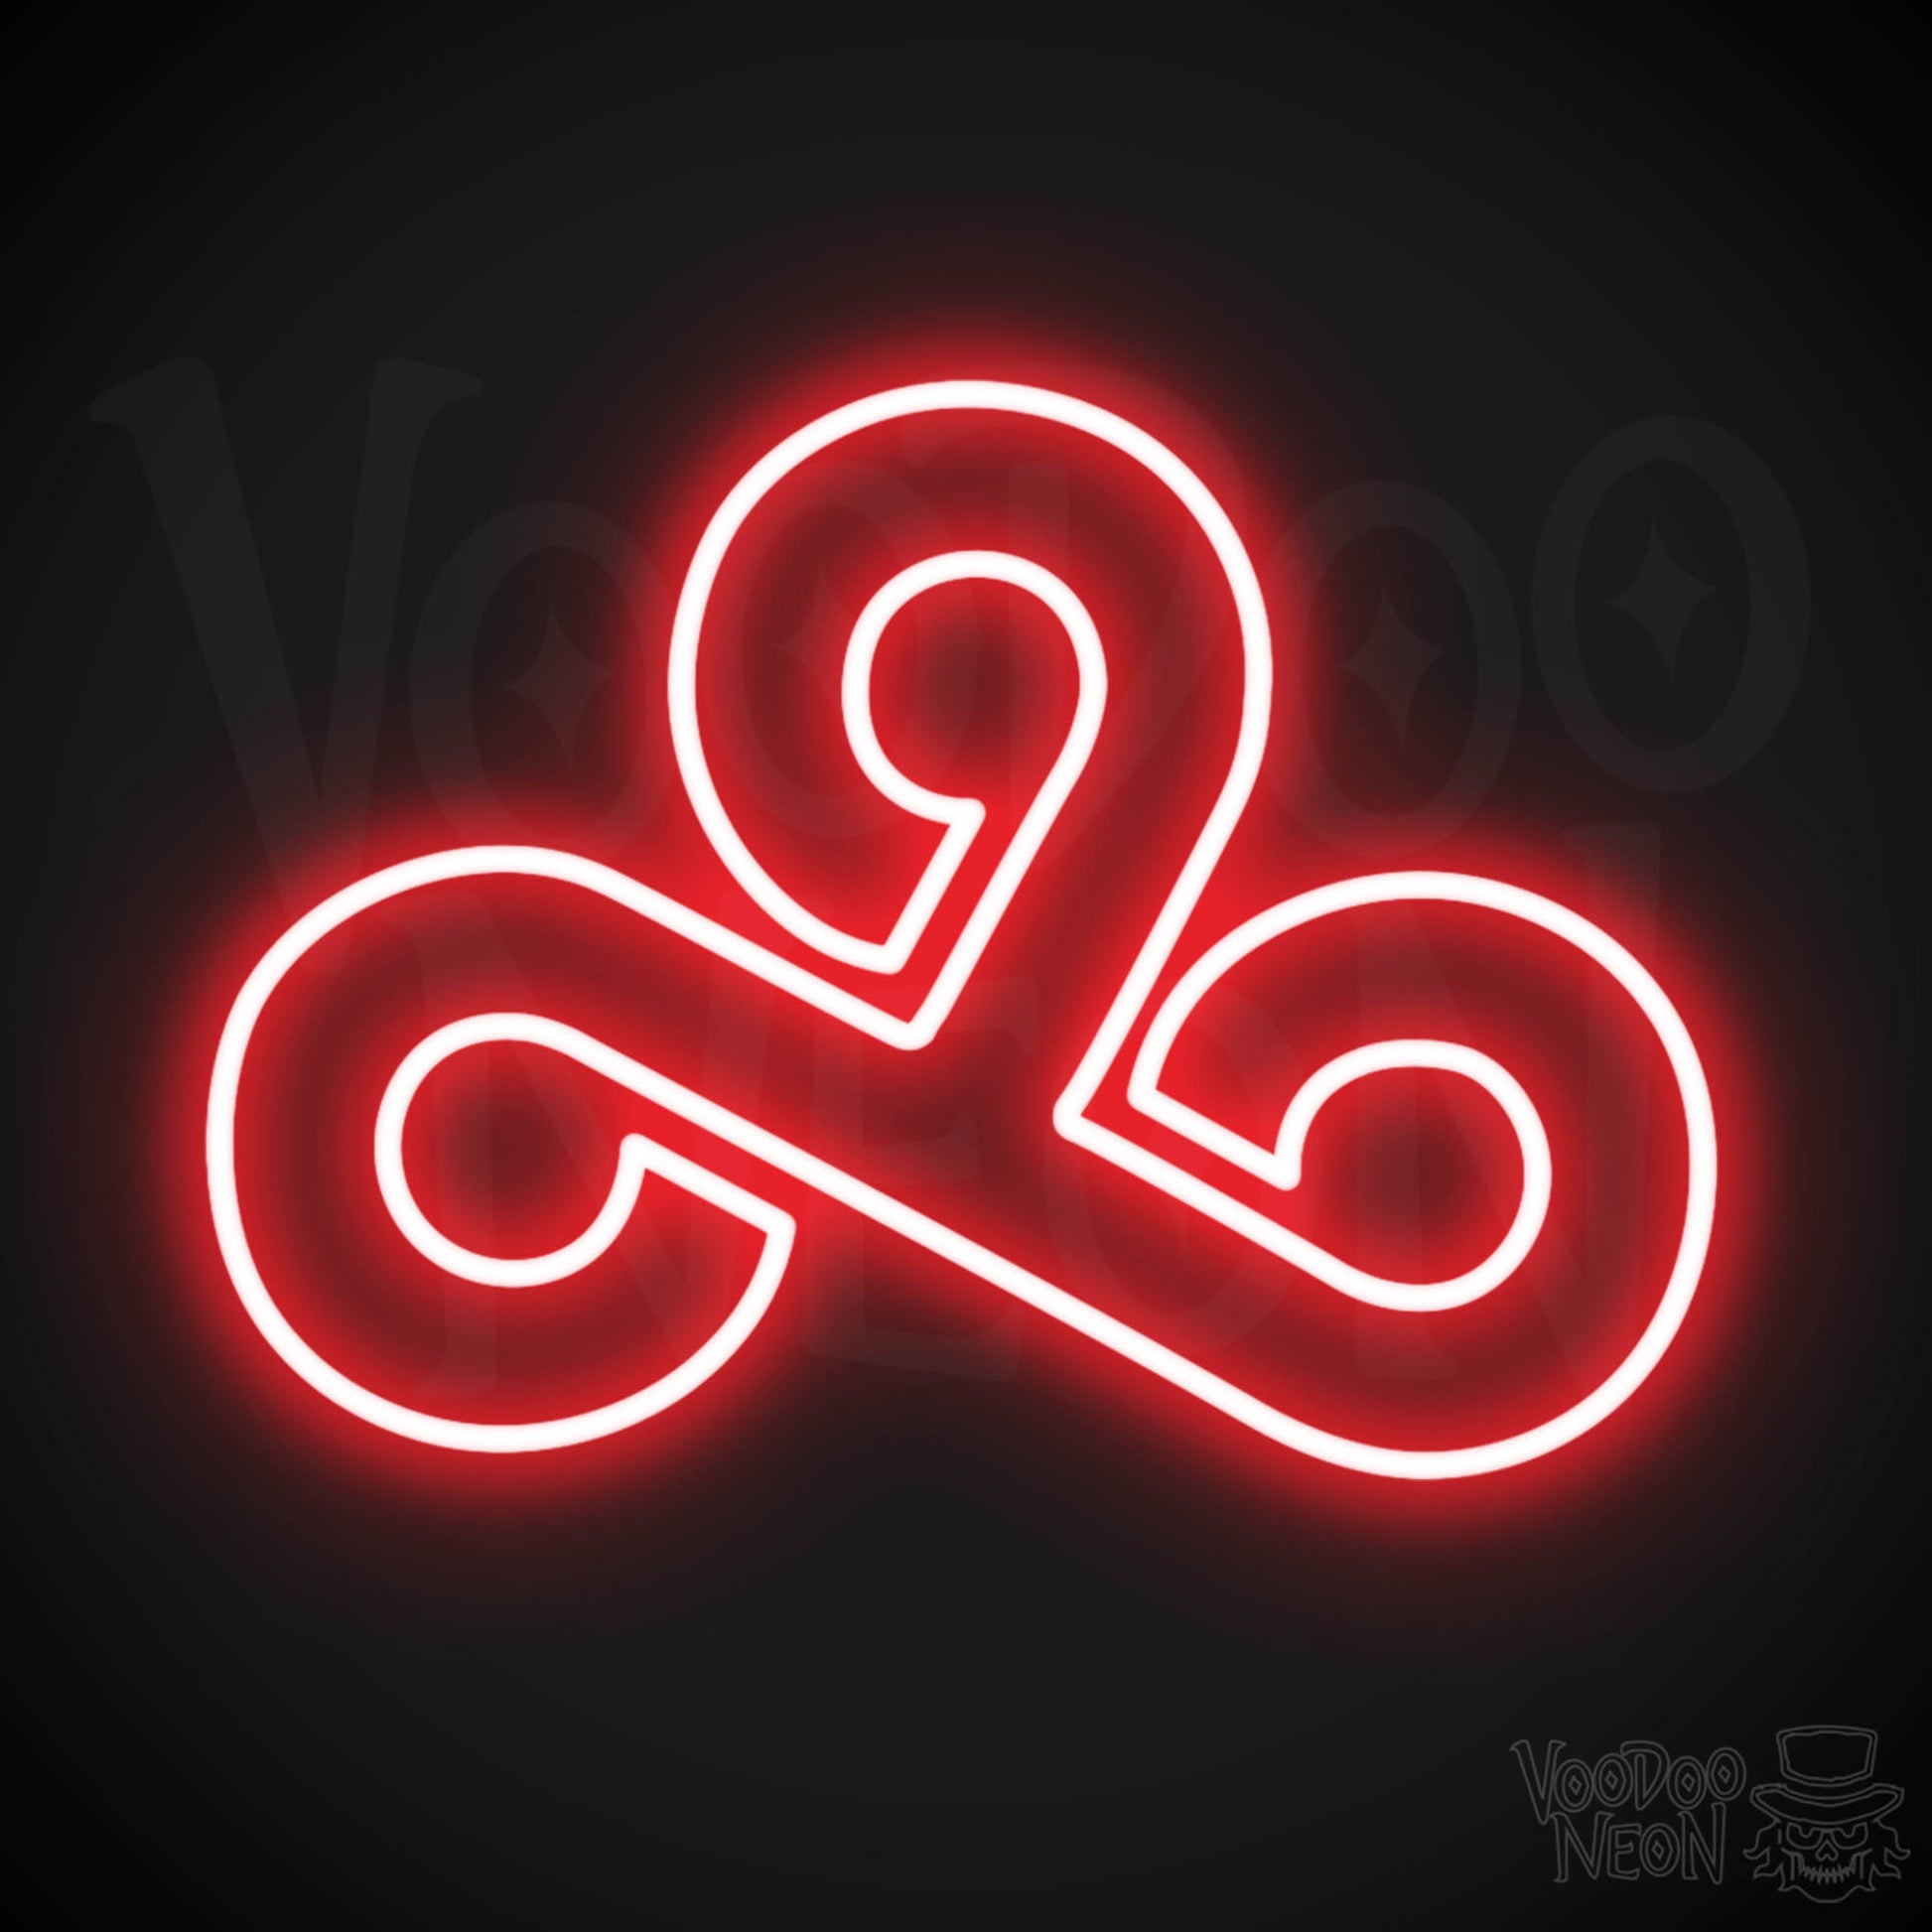 Cloud 9 Neon Sign - Neon Cloud 9 Sign - Cloud 9 Wall Art - Color Red